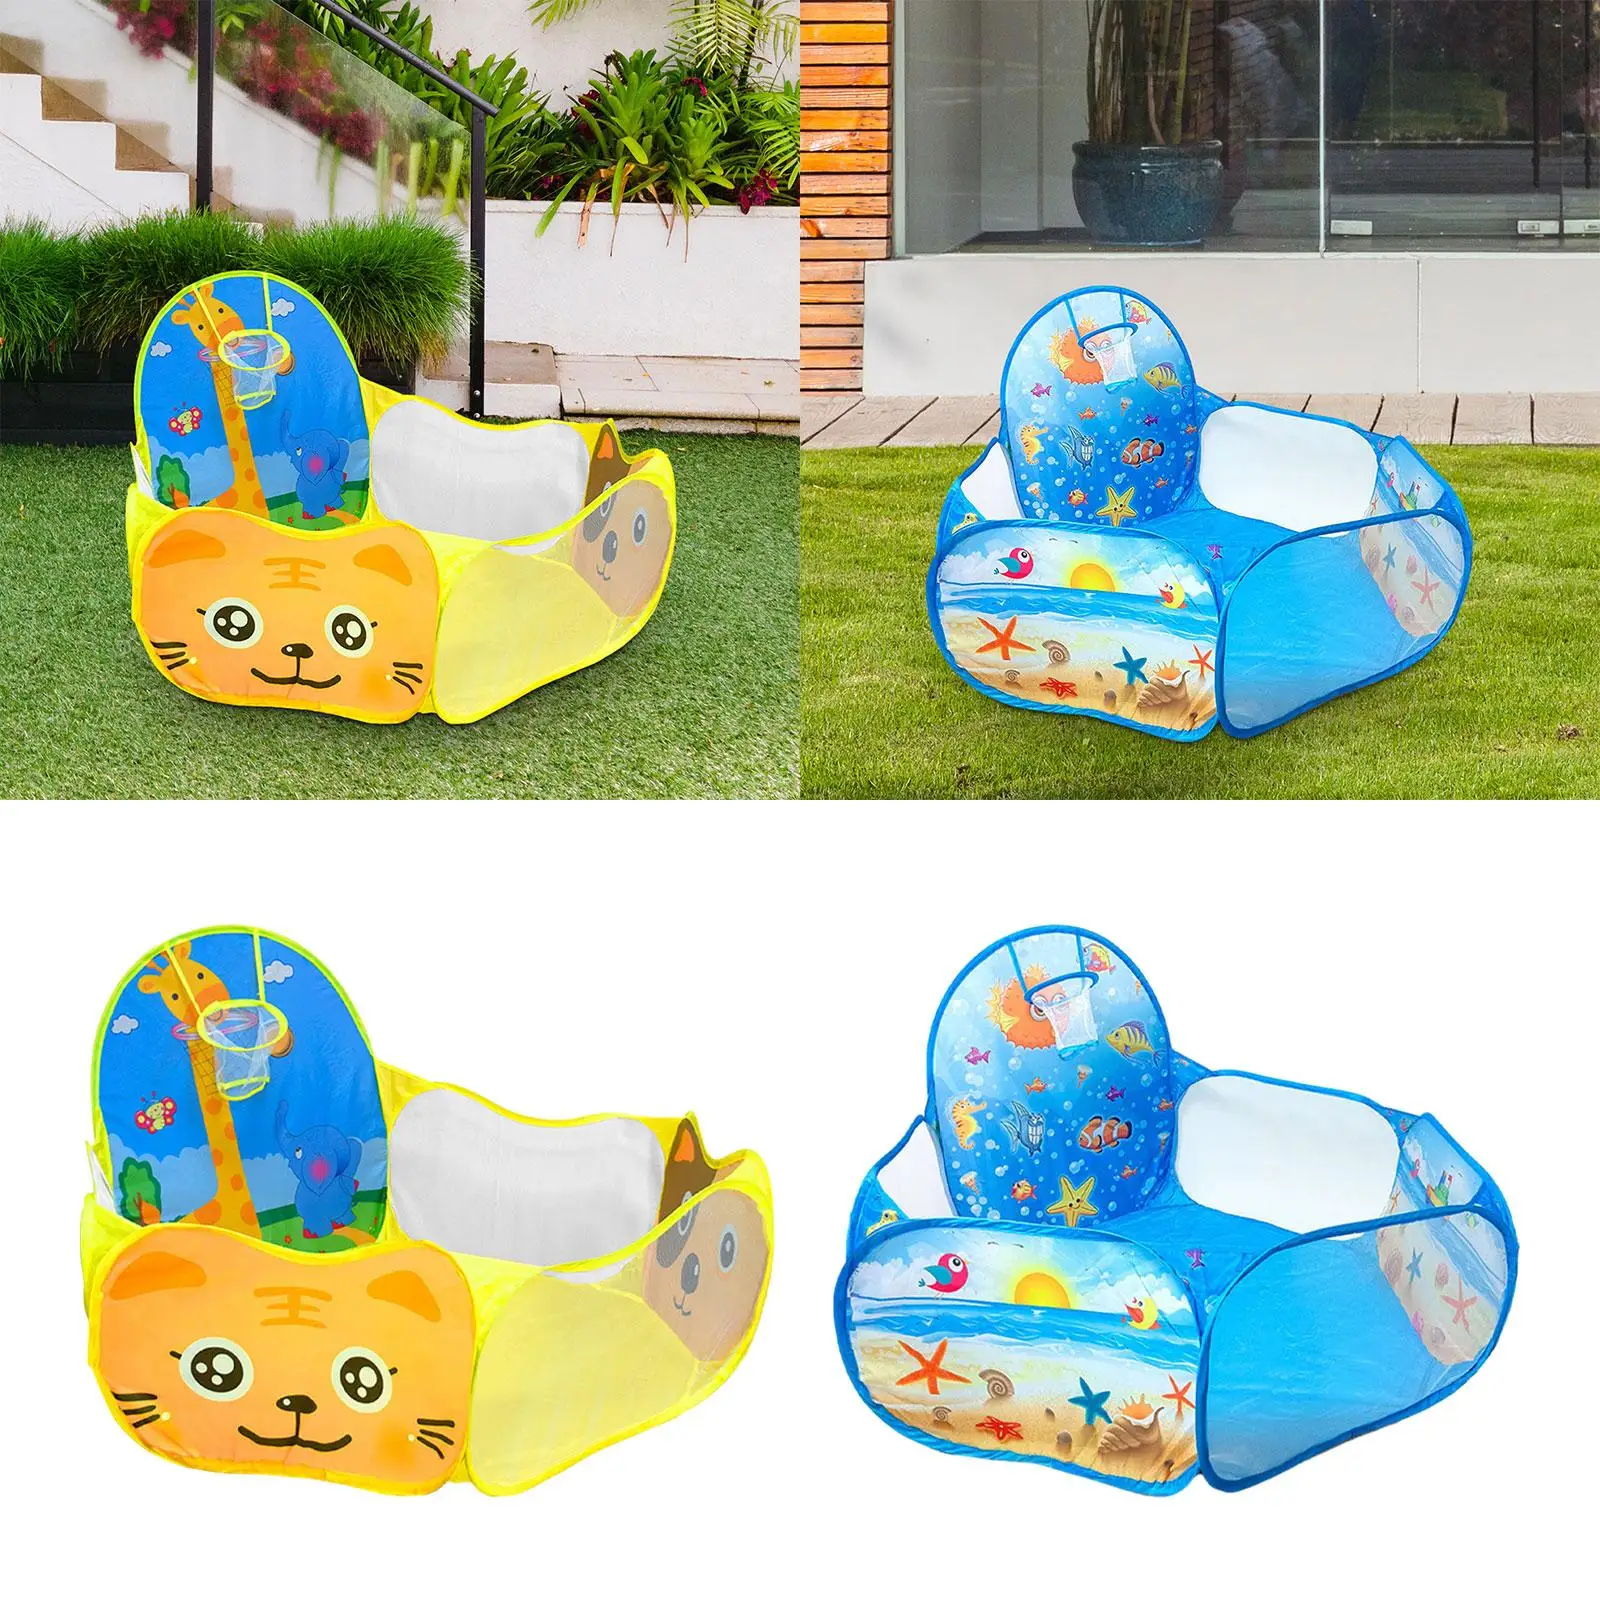 Childrens Ball Play Tent Gift Child Room Decoration Baby Crawl Playpen Toys with Basketball Hoop Foldable Tent for Toddlers